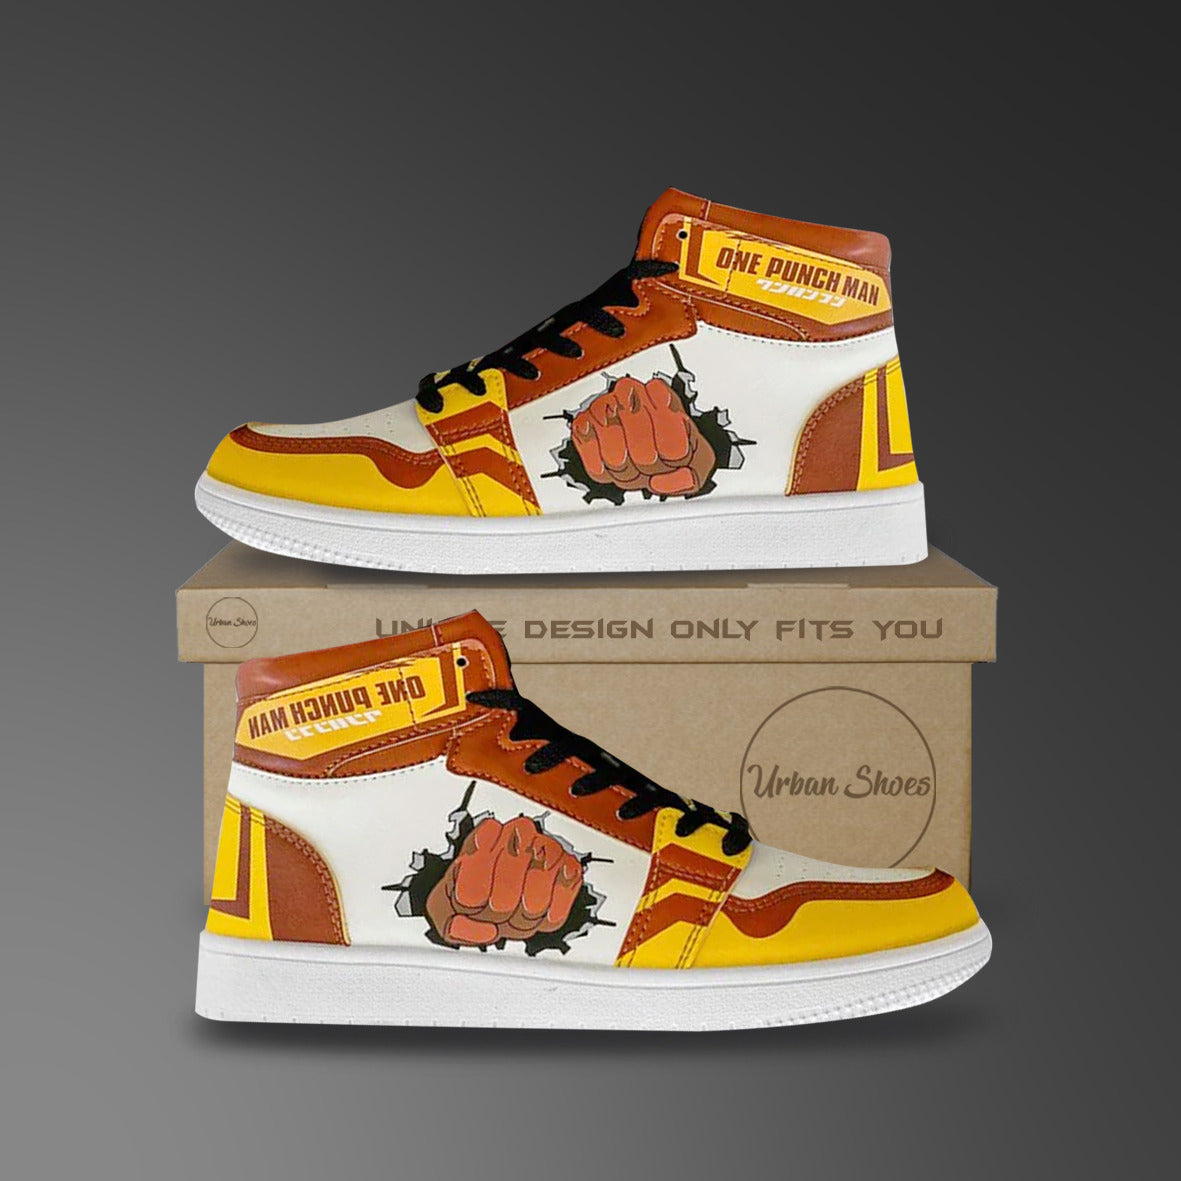 ONE PUNCH MAX Sneakers